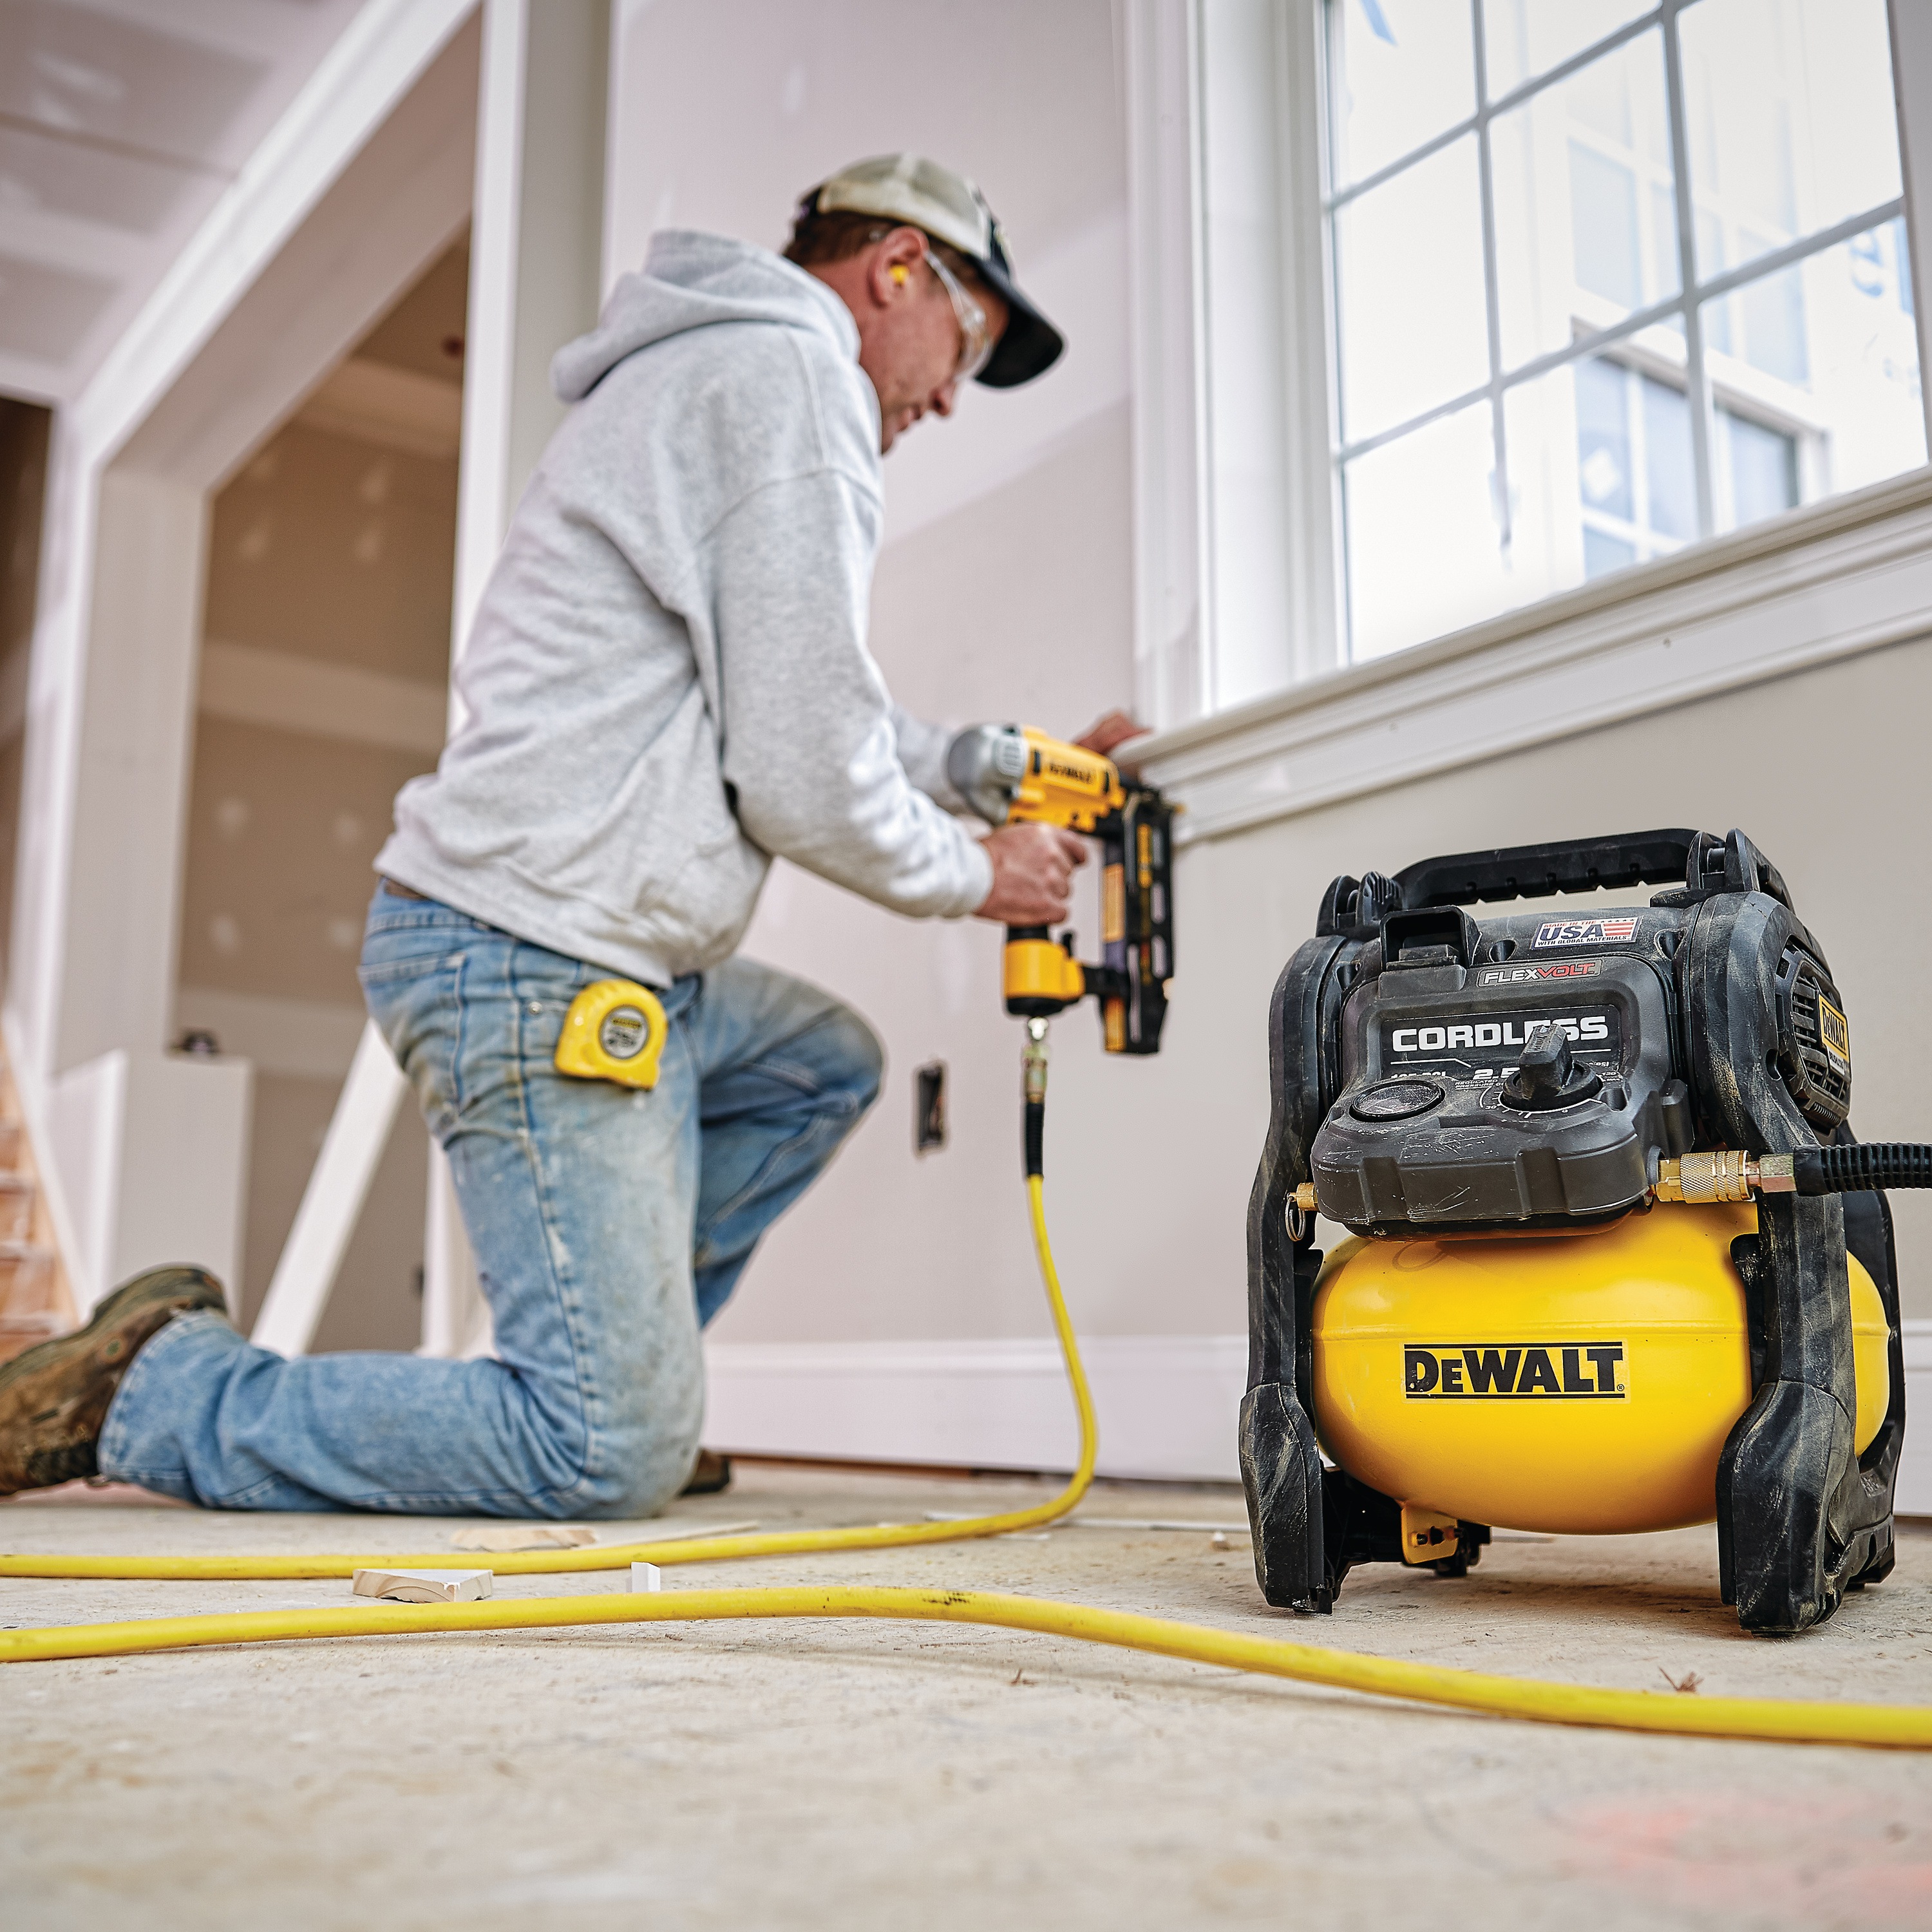 FLEXVOLT® 2.5 GALLON CORDLESS AIR COMPRESSOR being used by a person to power a pneumatic nailer for countersinking holes in a wooden window frame